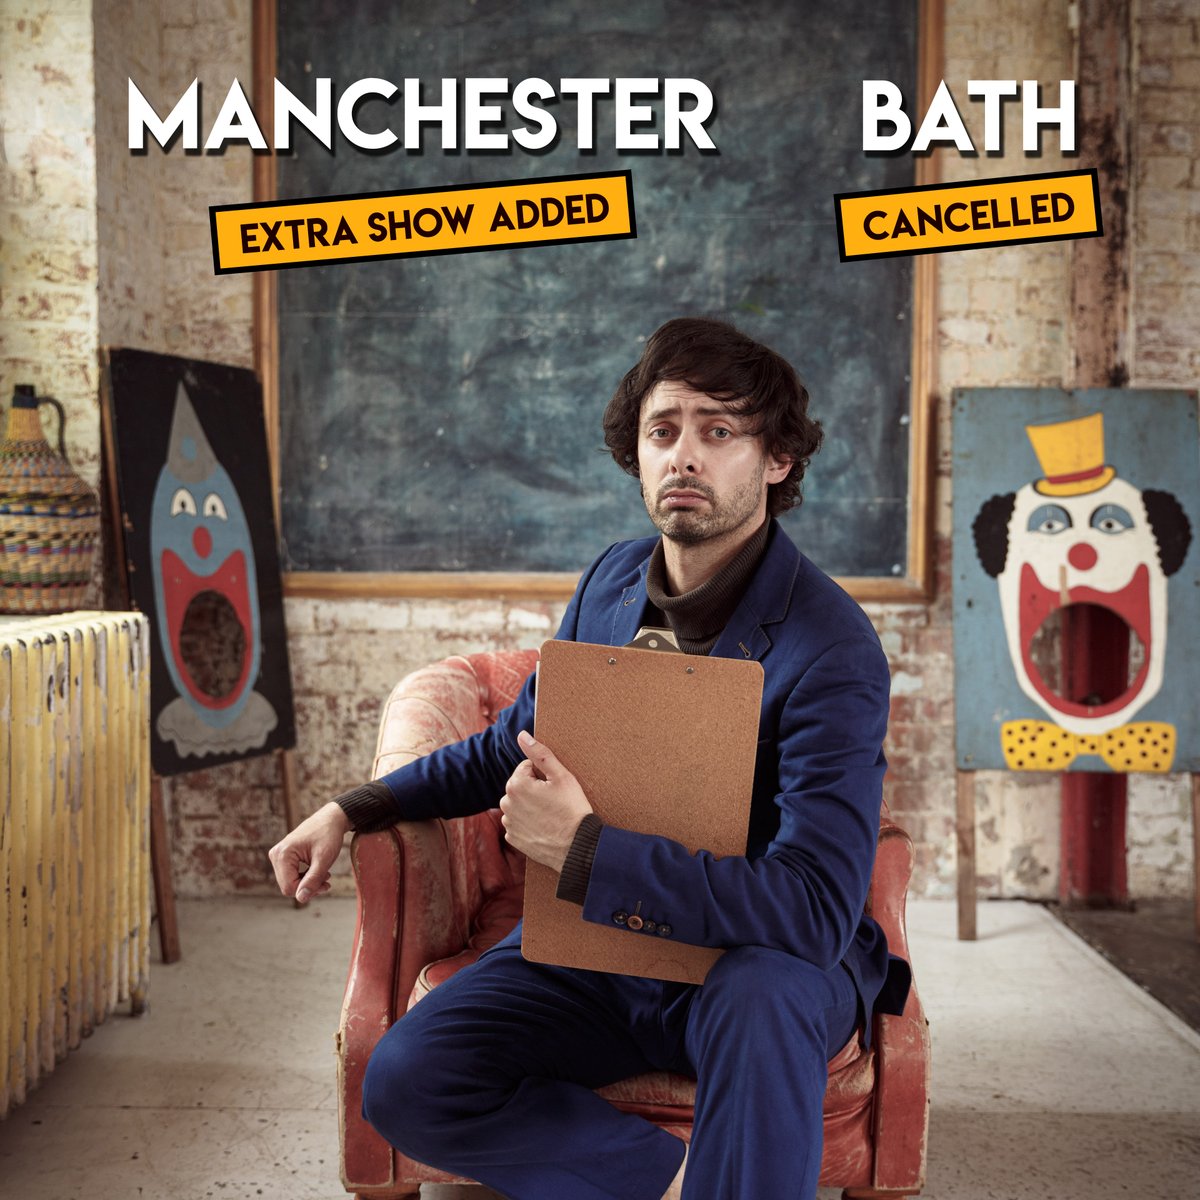 Ah, the joys of touring. For those in Manchester who missed out on tickets to LES ENFANTS TERRIBLES, an extra date has been added in October, on sale next week. Bath, you left it too late. This trend of only buying tickets last-minute needs to stop. Be more Manchester, less Bath.